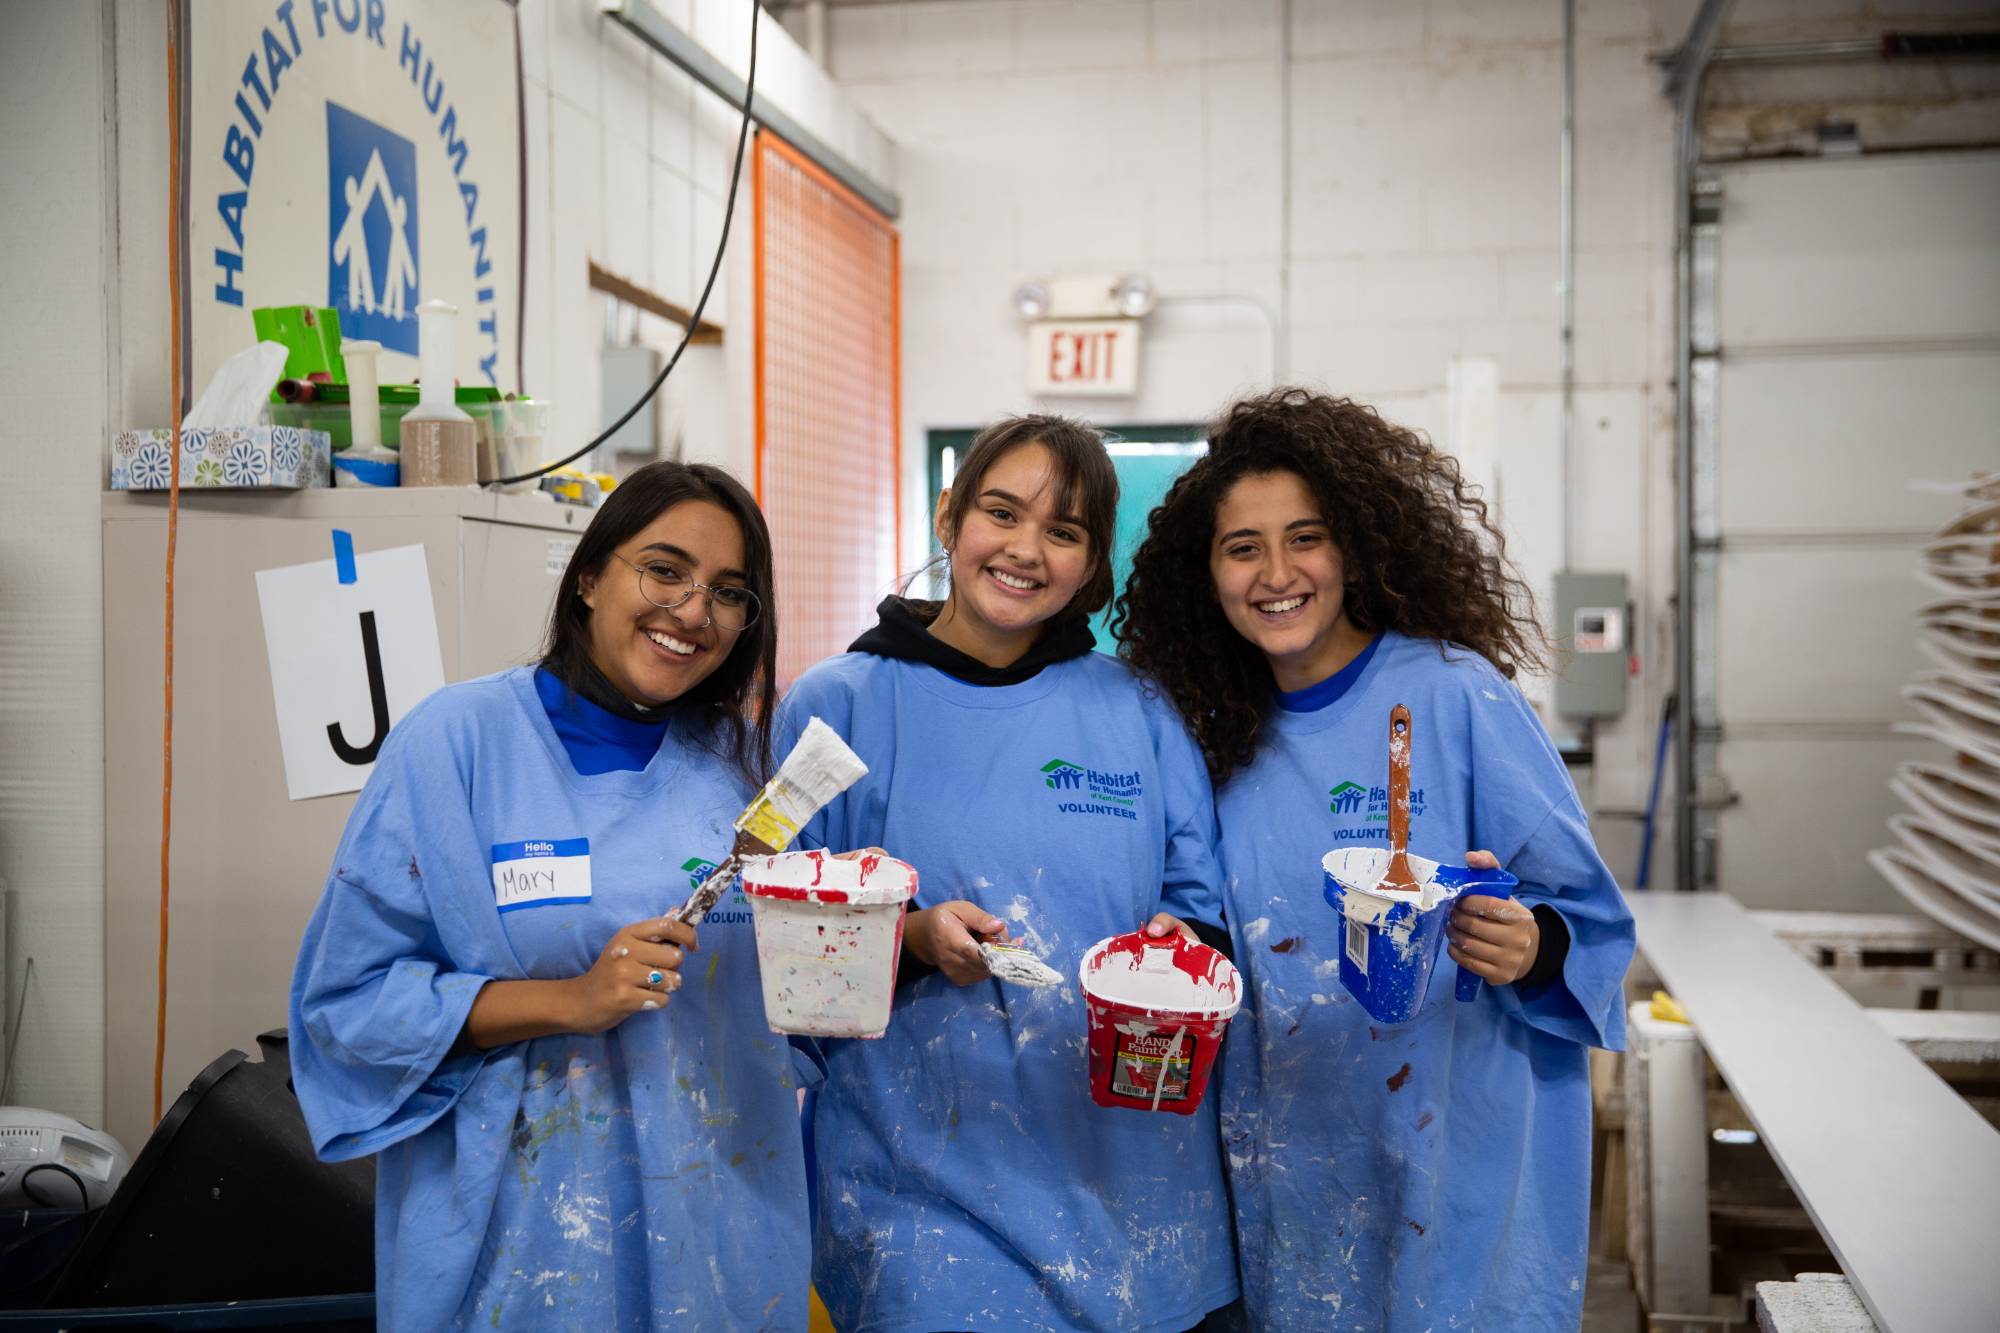 Students wearing smocks and holding paint brushes, smiling at the camera